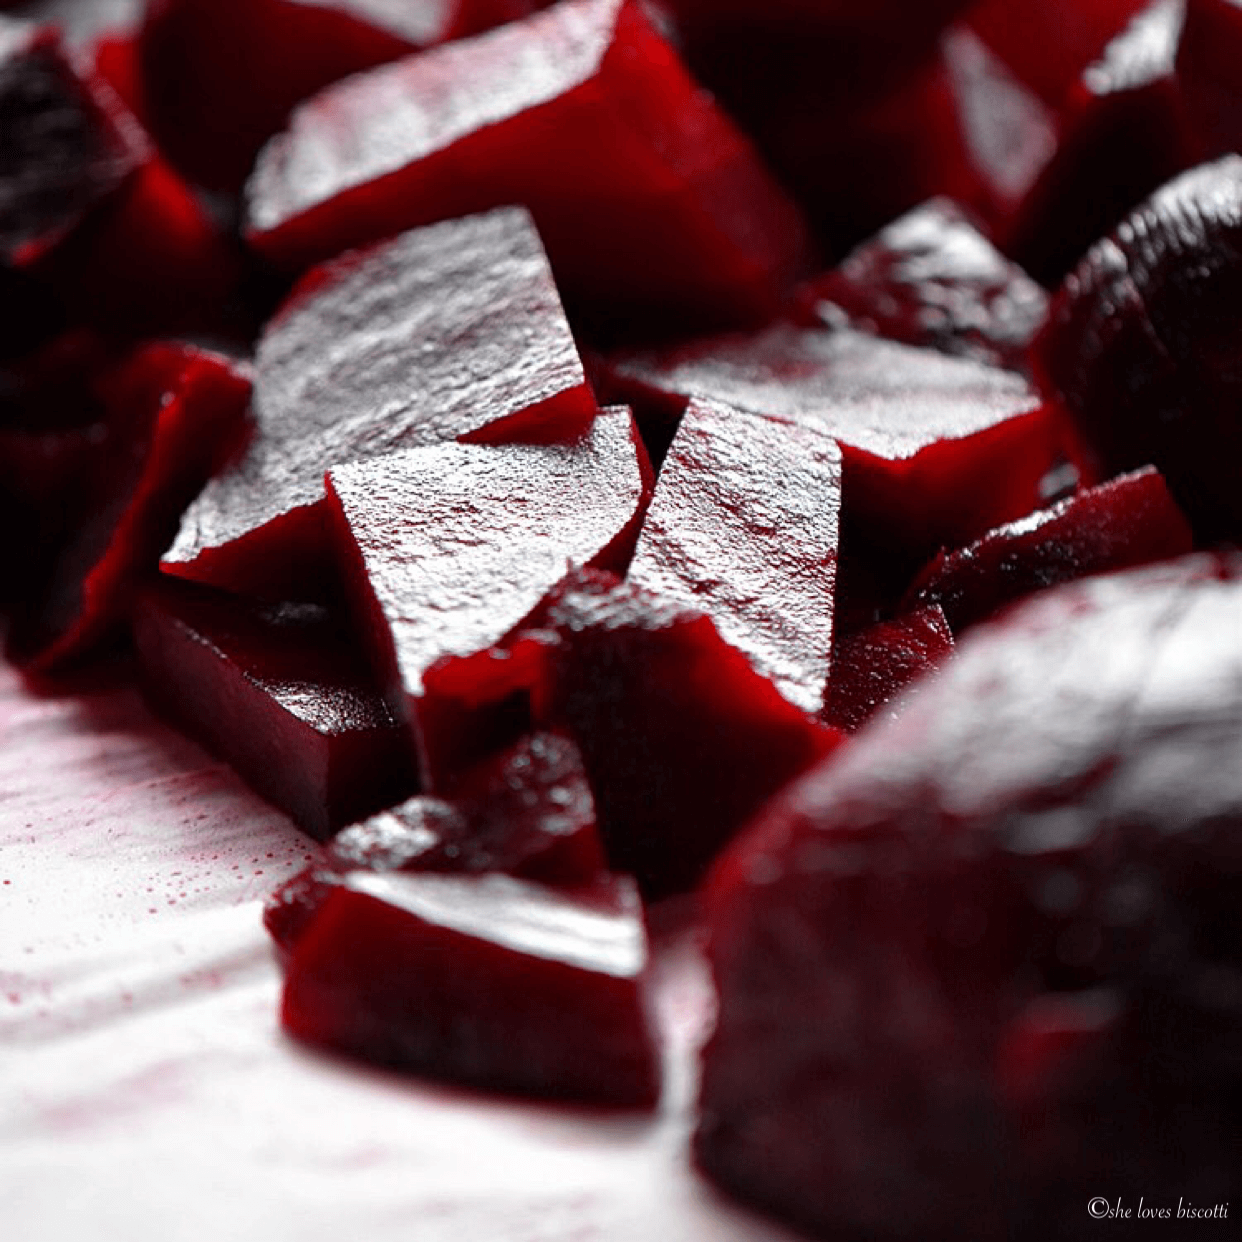 Colorful cut up beet root.